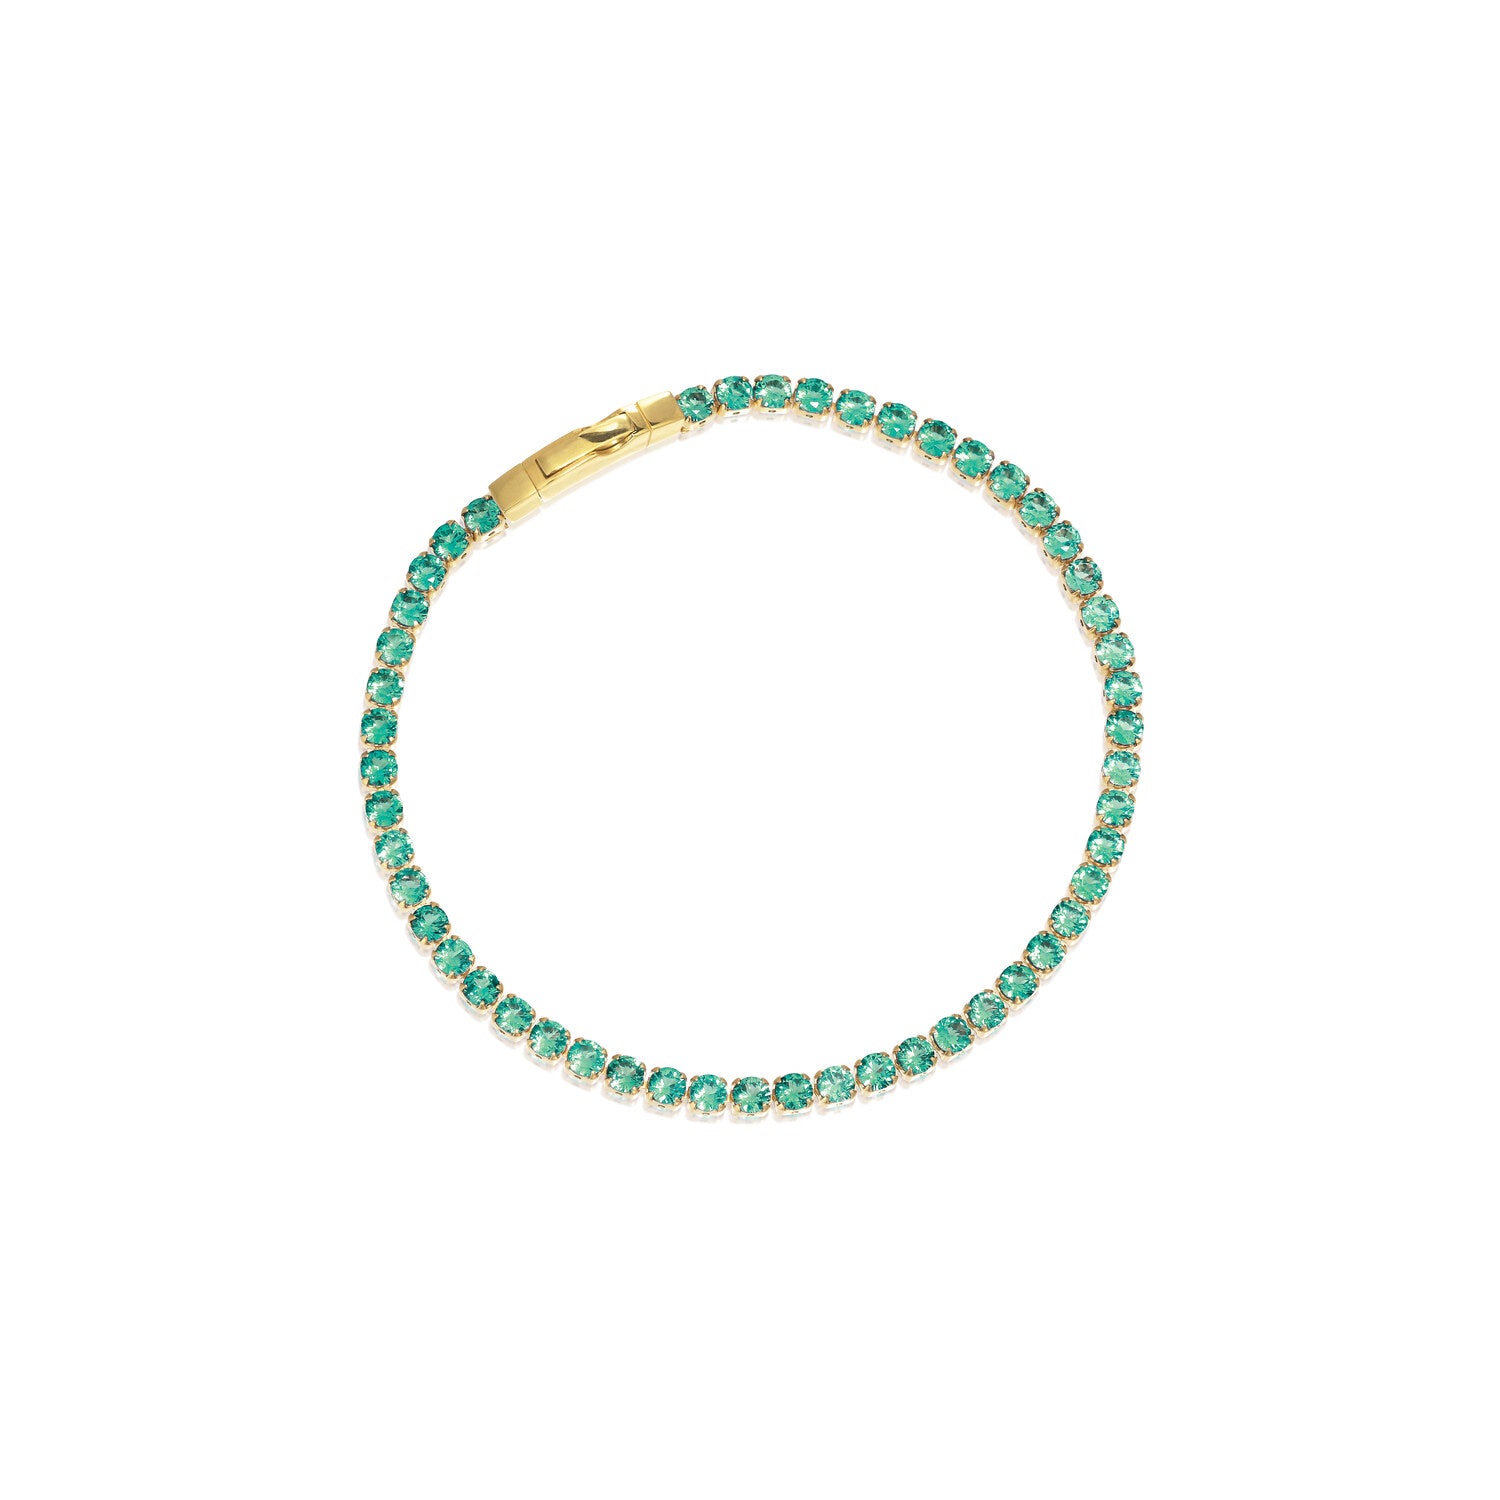 18K gold plated | Turquoise | 19 cm, 18K gold plated | Turquoise | 18 cm, 18K gold plated | Turquoise | 16 cm, 18K gold plated | Turquoise | 17 cm